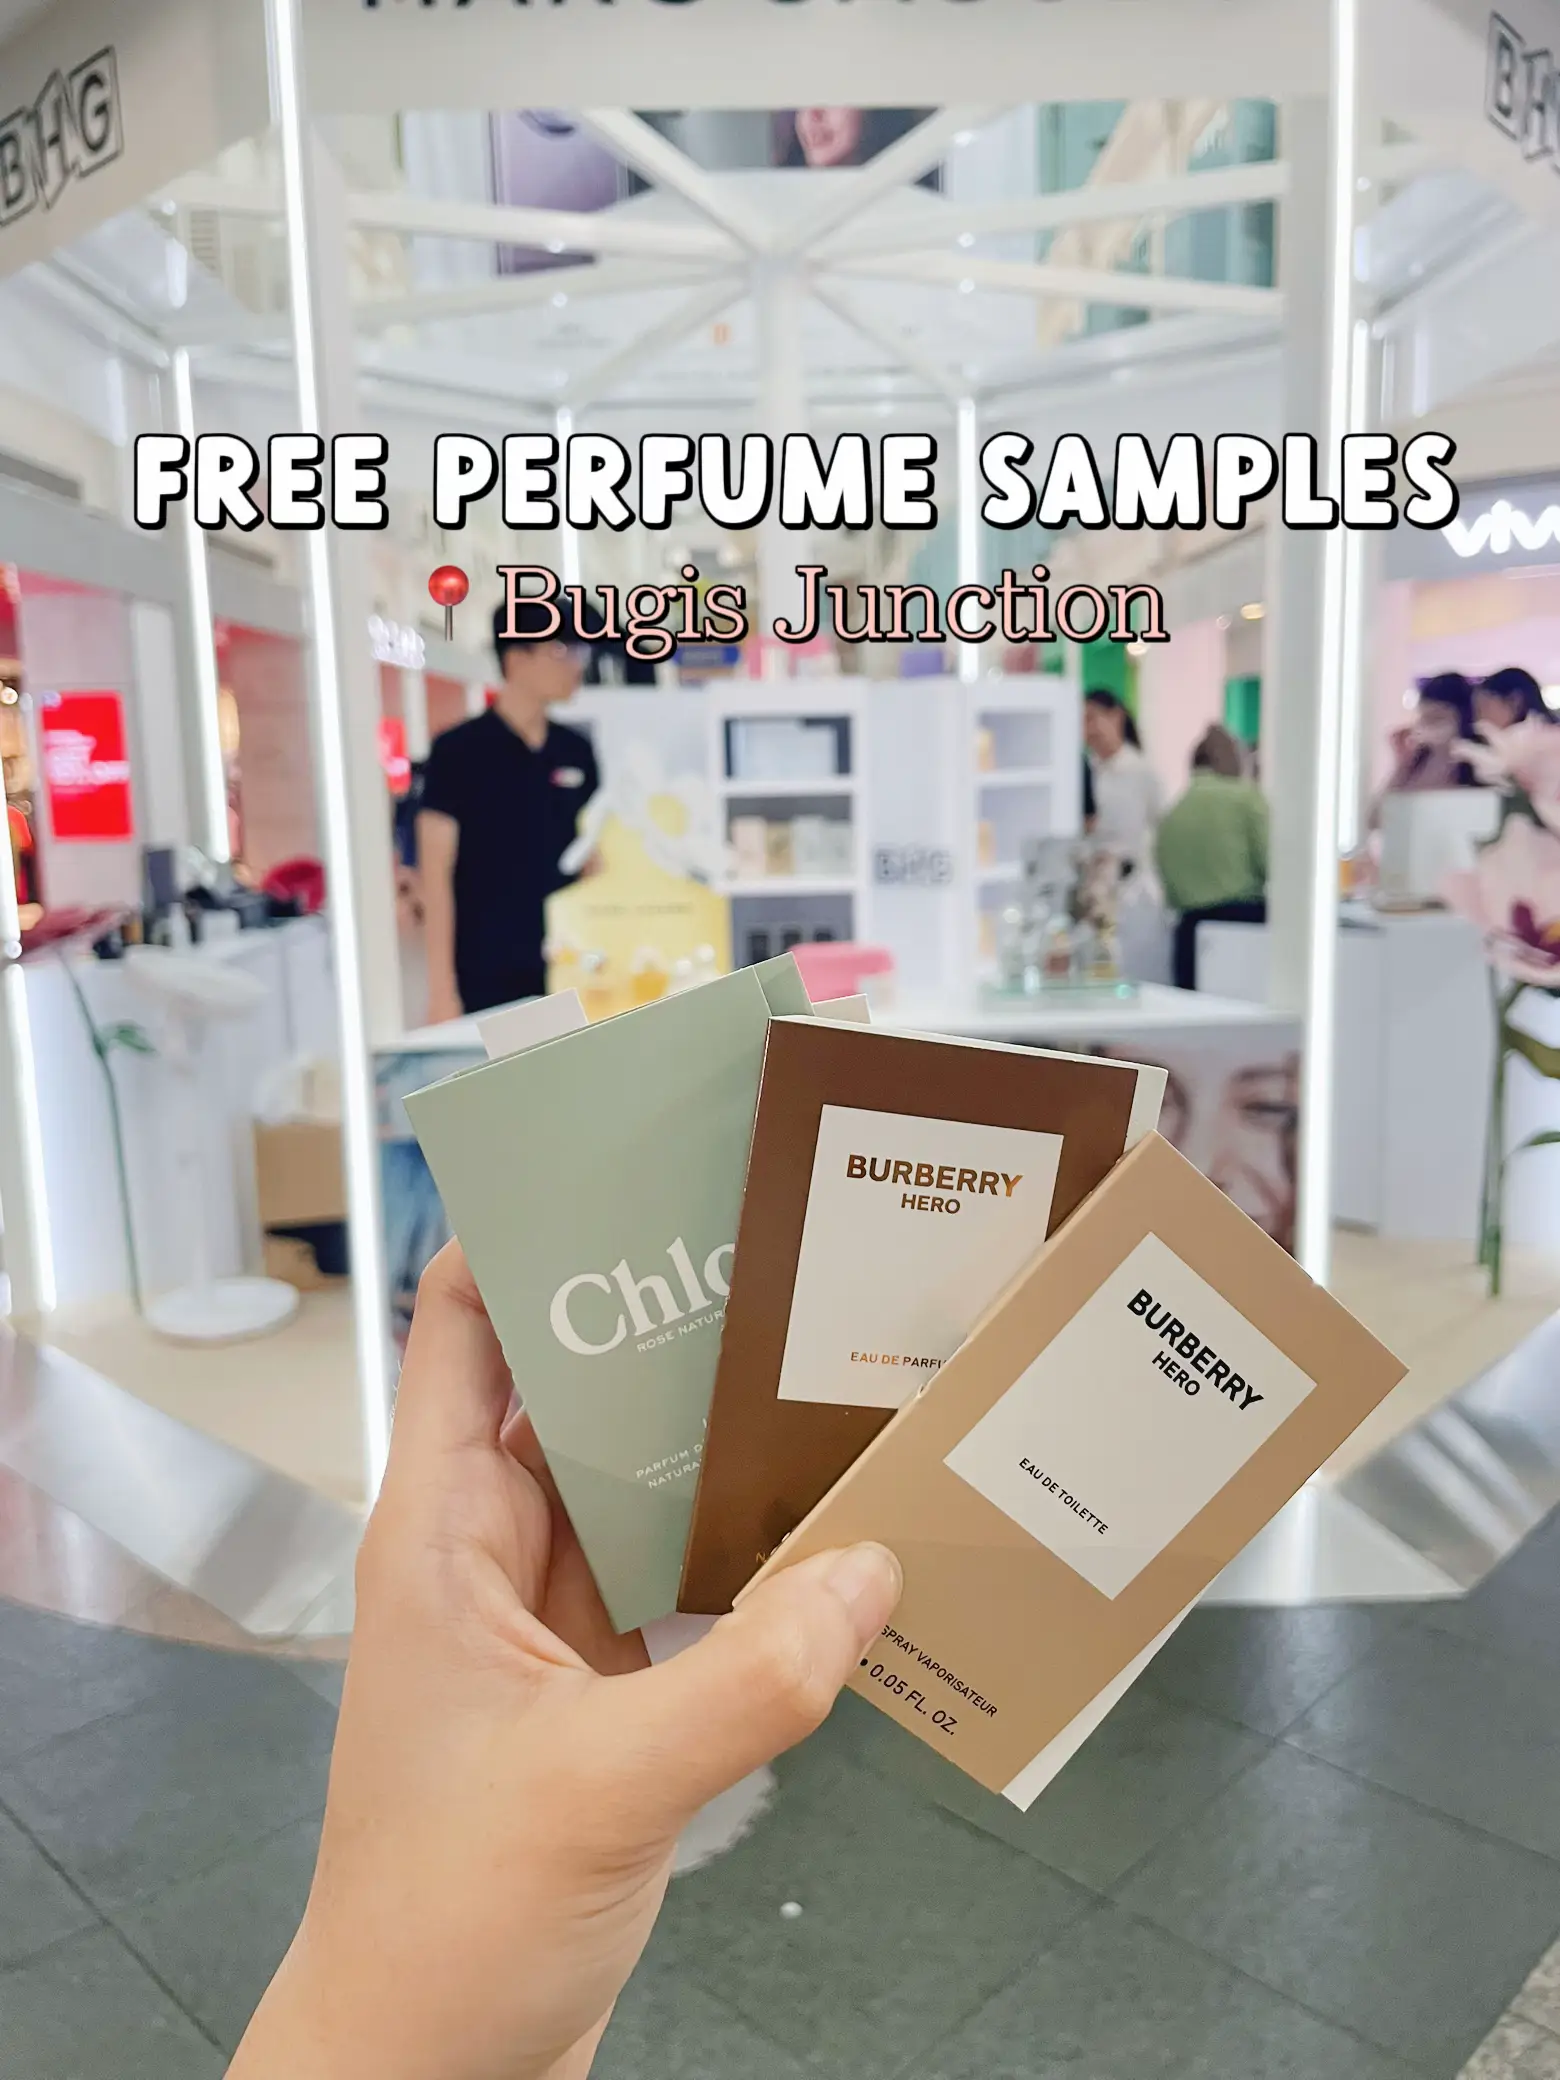 🇸🇬FREE PERFUME SAMPLES😍✅'s images(0)